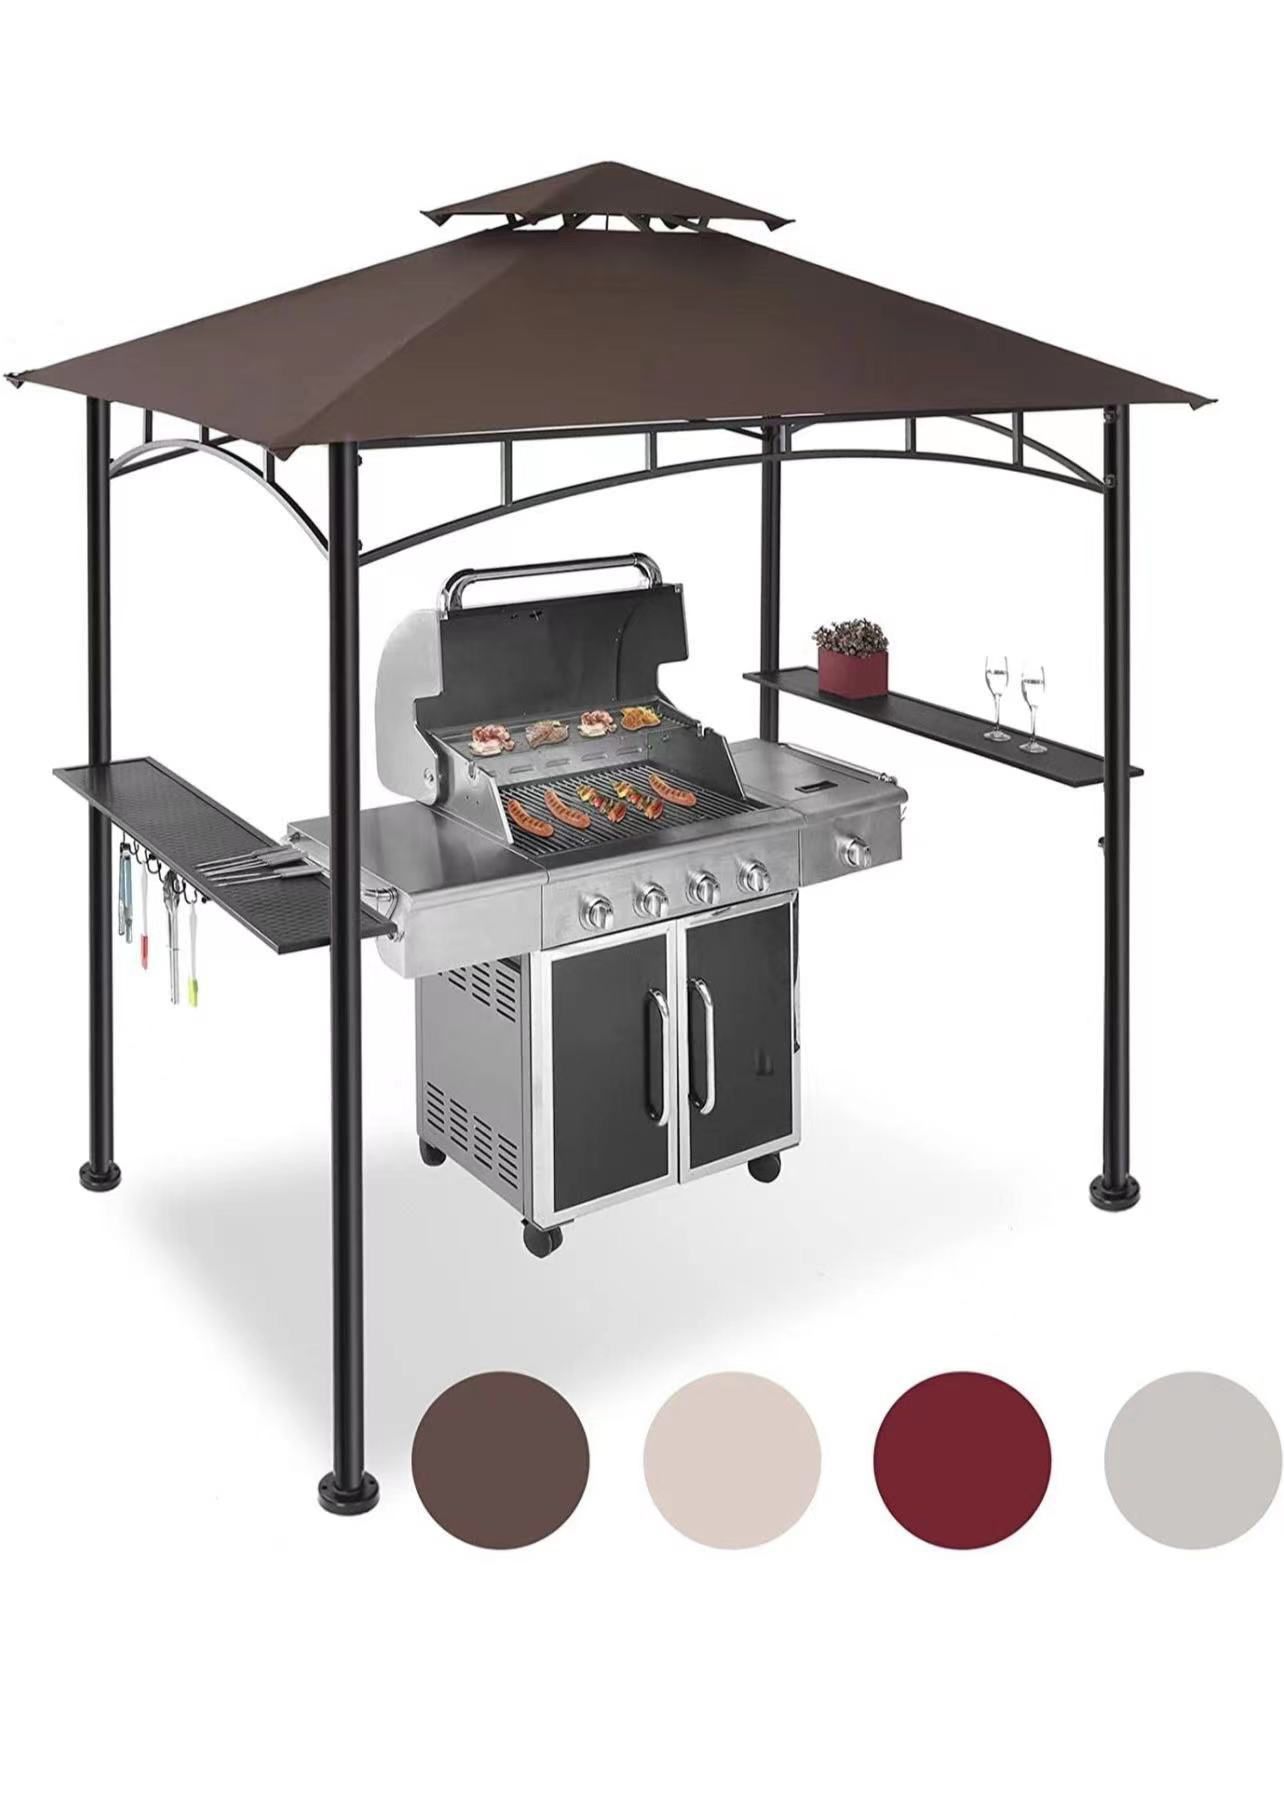 Grill Gazebo 8'x 5' Barbecue Canopy BBQ Gazebo Canopy Tent w/Air Vent Double Tiered Outdoor